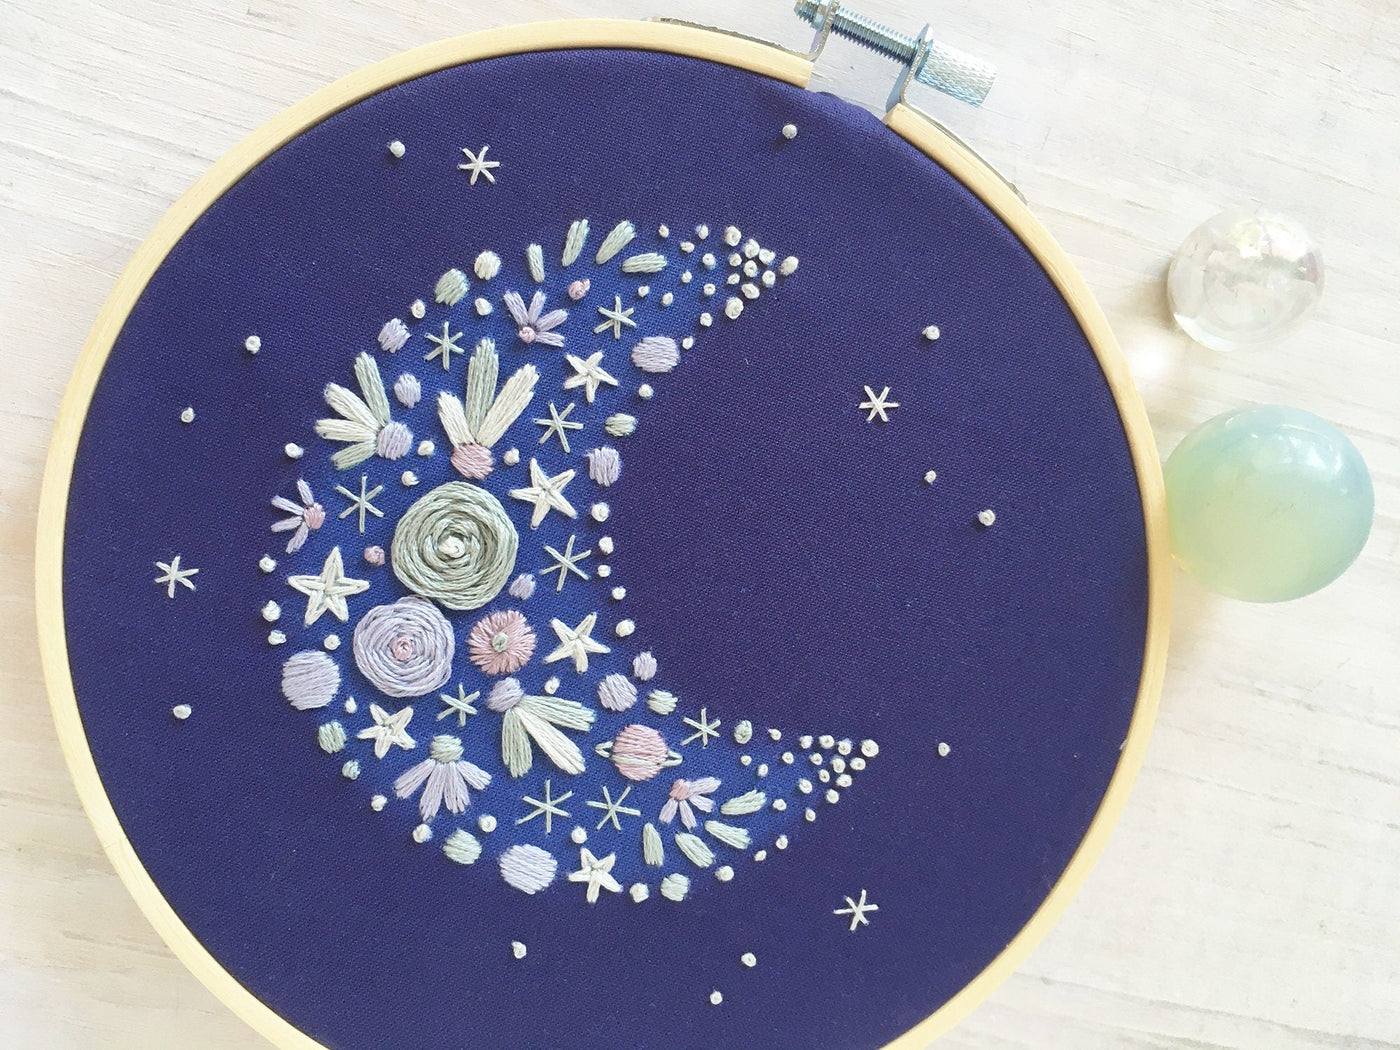 Floral Crescent Moon Hand Embroidery Kit